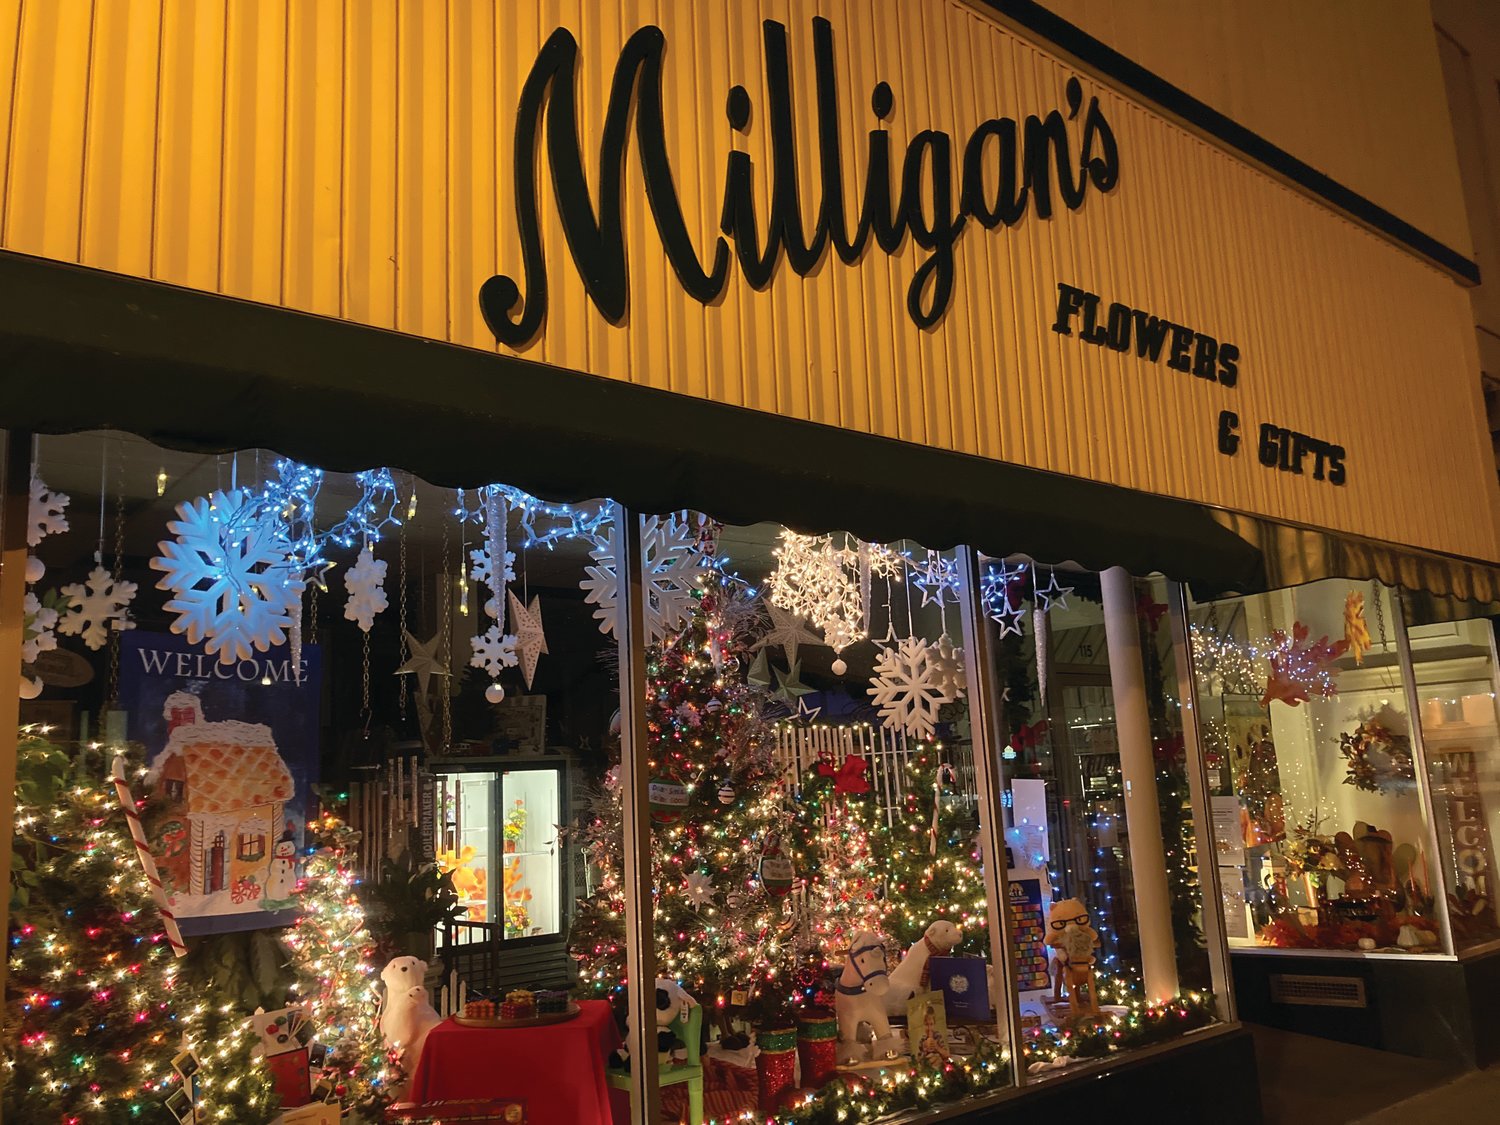 The window at Milligan's Flowers & Gifts in downtown Crawfordsville is decked out for the holiday window decorating contest.